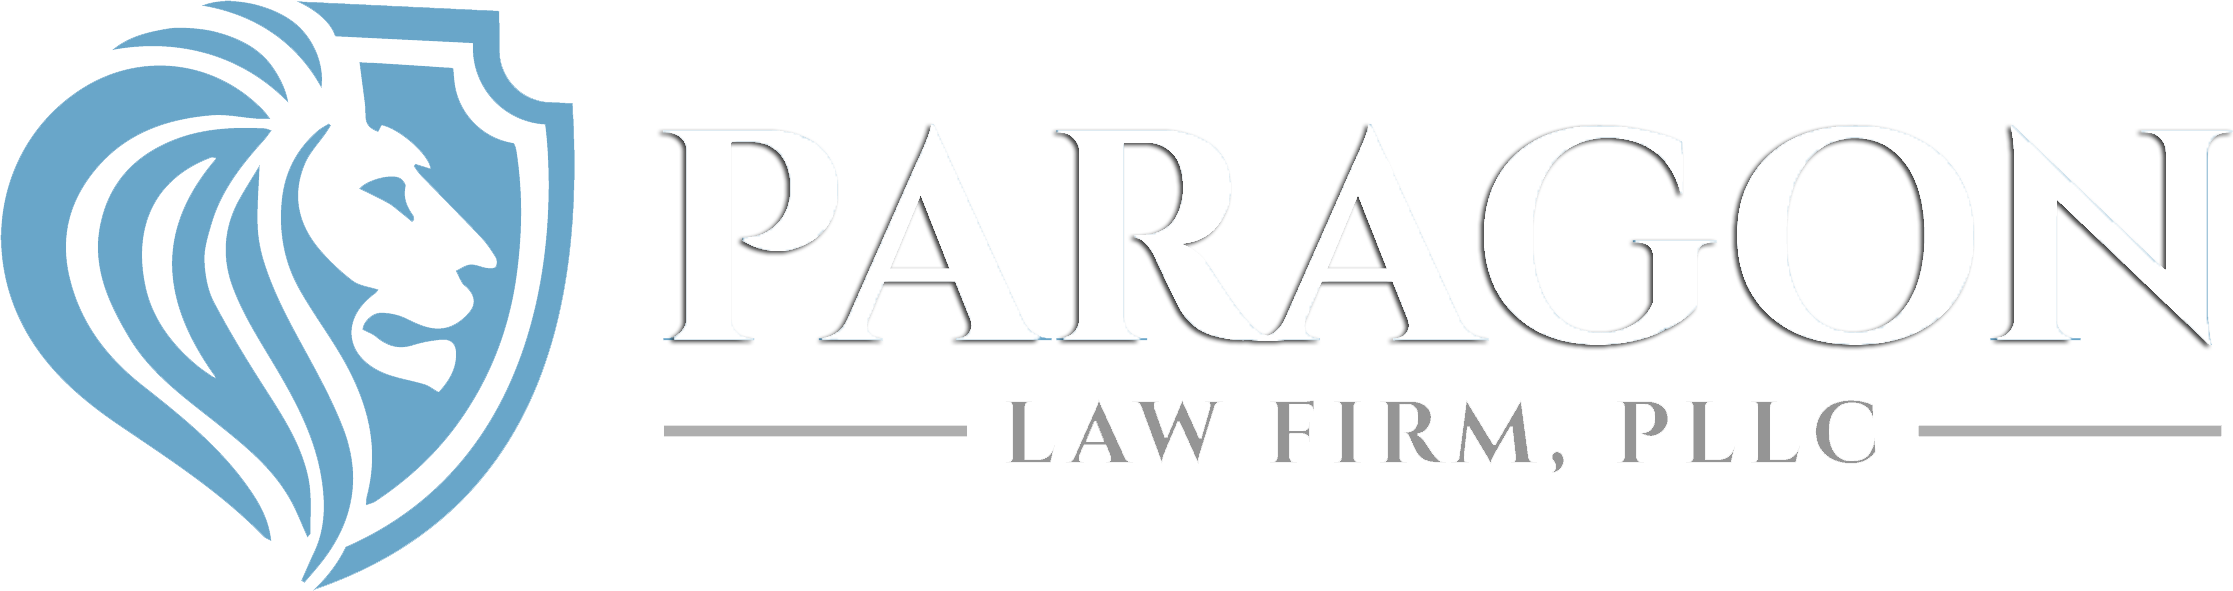 Paragon Law Firm